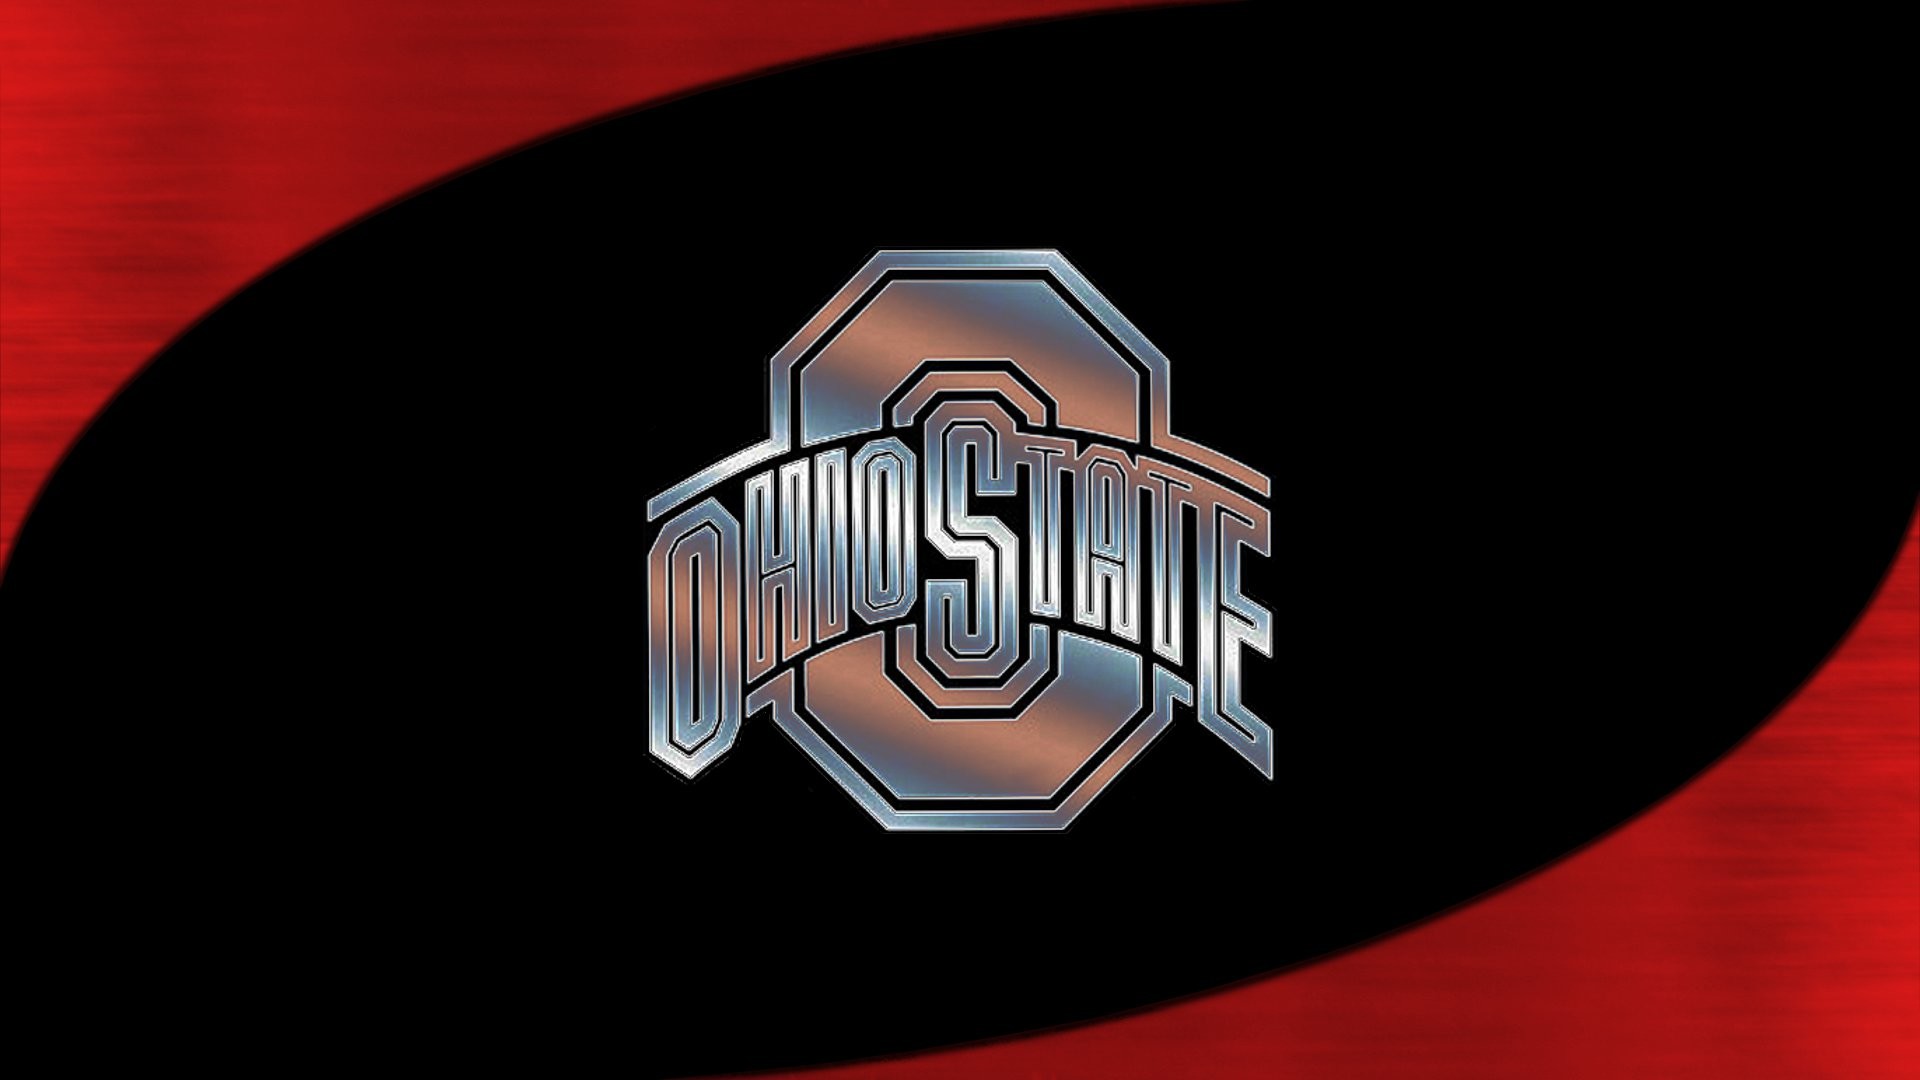 1920x1080 Ohio State Buckeyes images OSU Wallpaper 144 HD wallpaper and background  photos